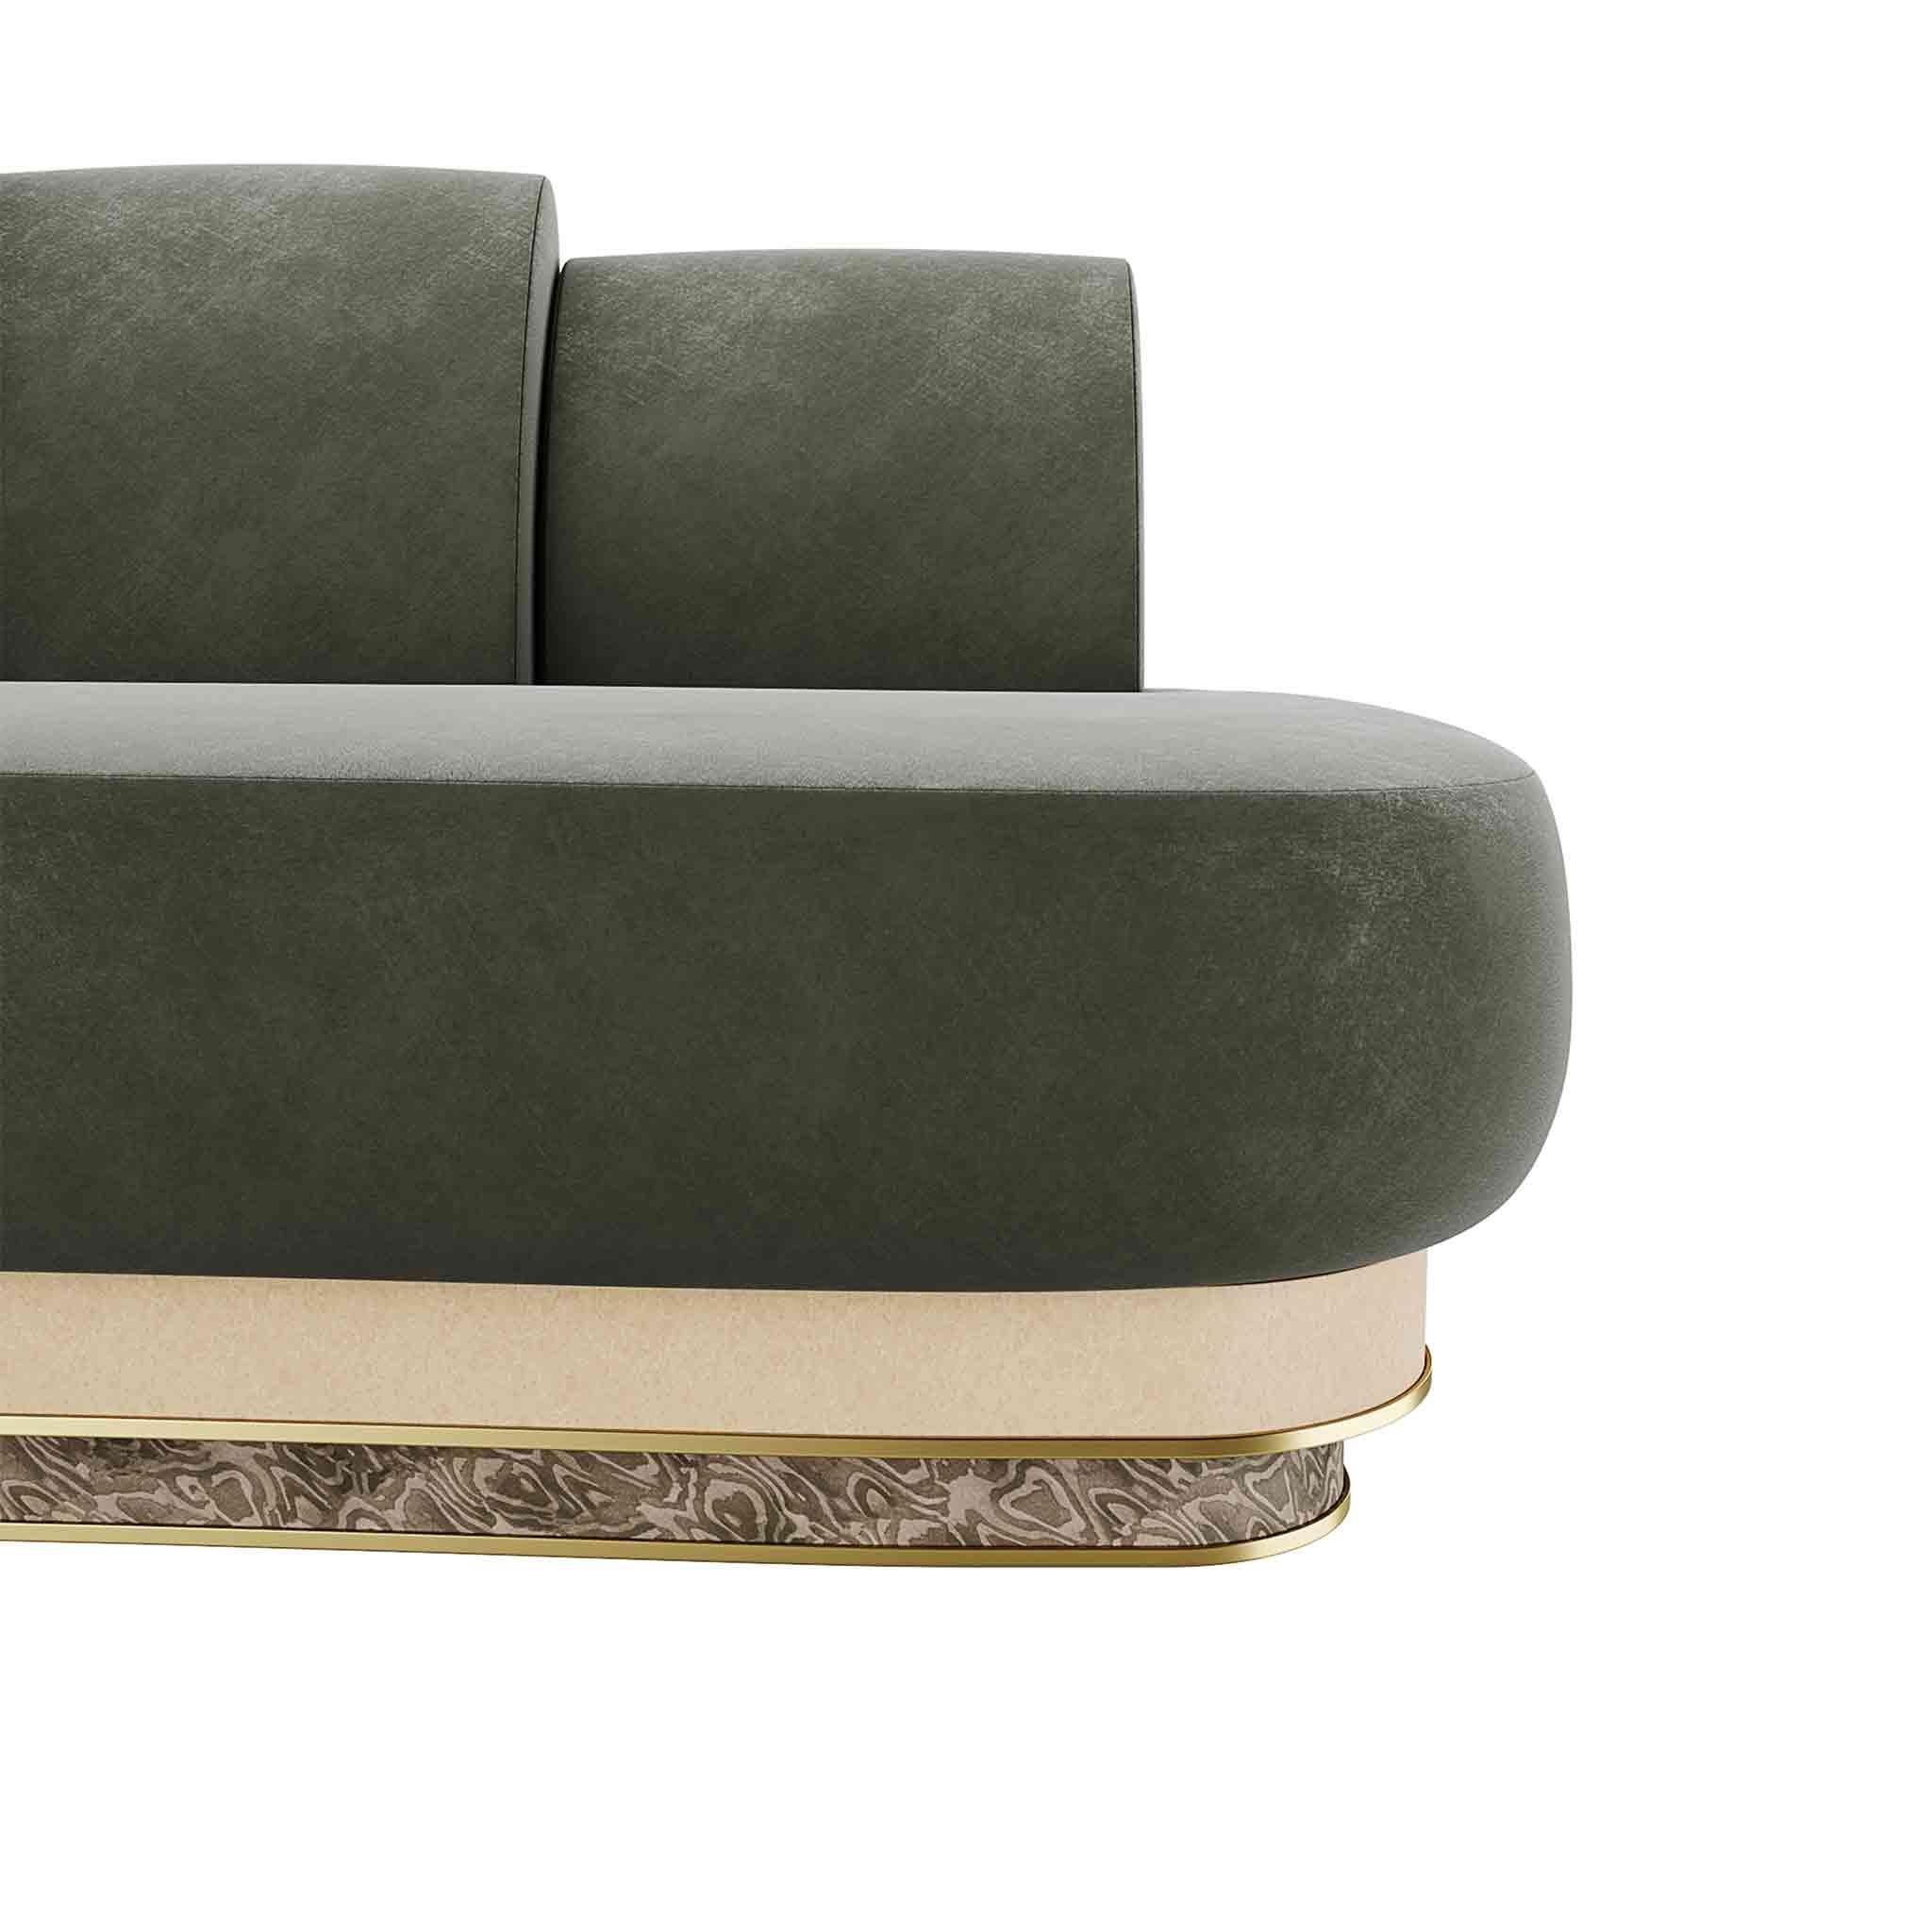 Kara Sofa is an art deco-style sofa. Its art deco inspirations are reflected in its shapes, revealing an eclectic, luxurious style. This modern design sofa promises to be the absolute protagonist of a living room project.

Materials: Upholstered in